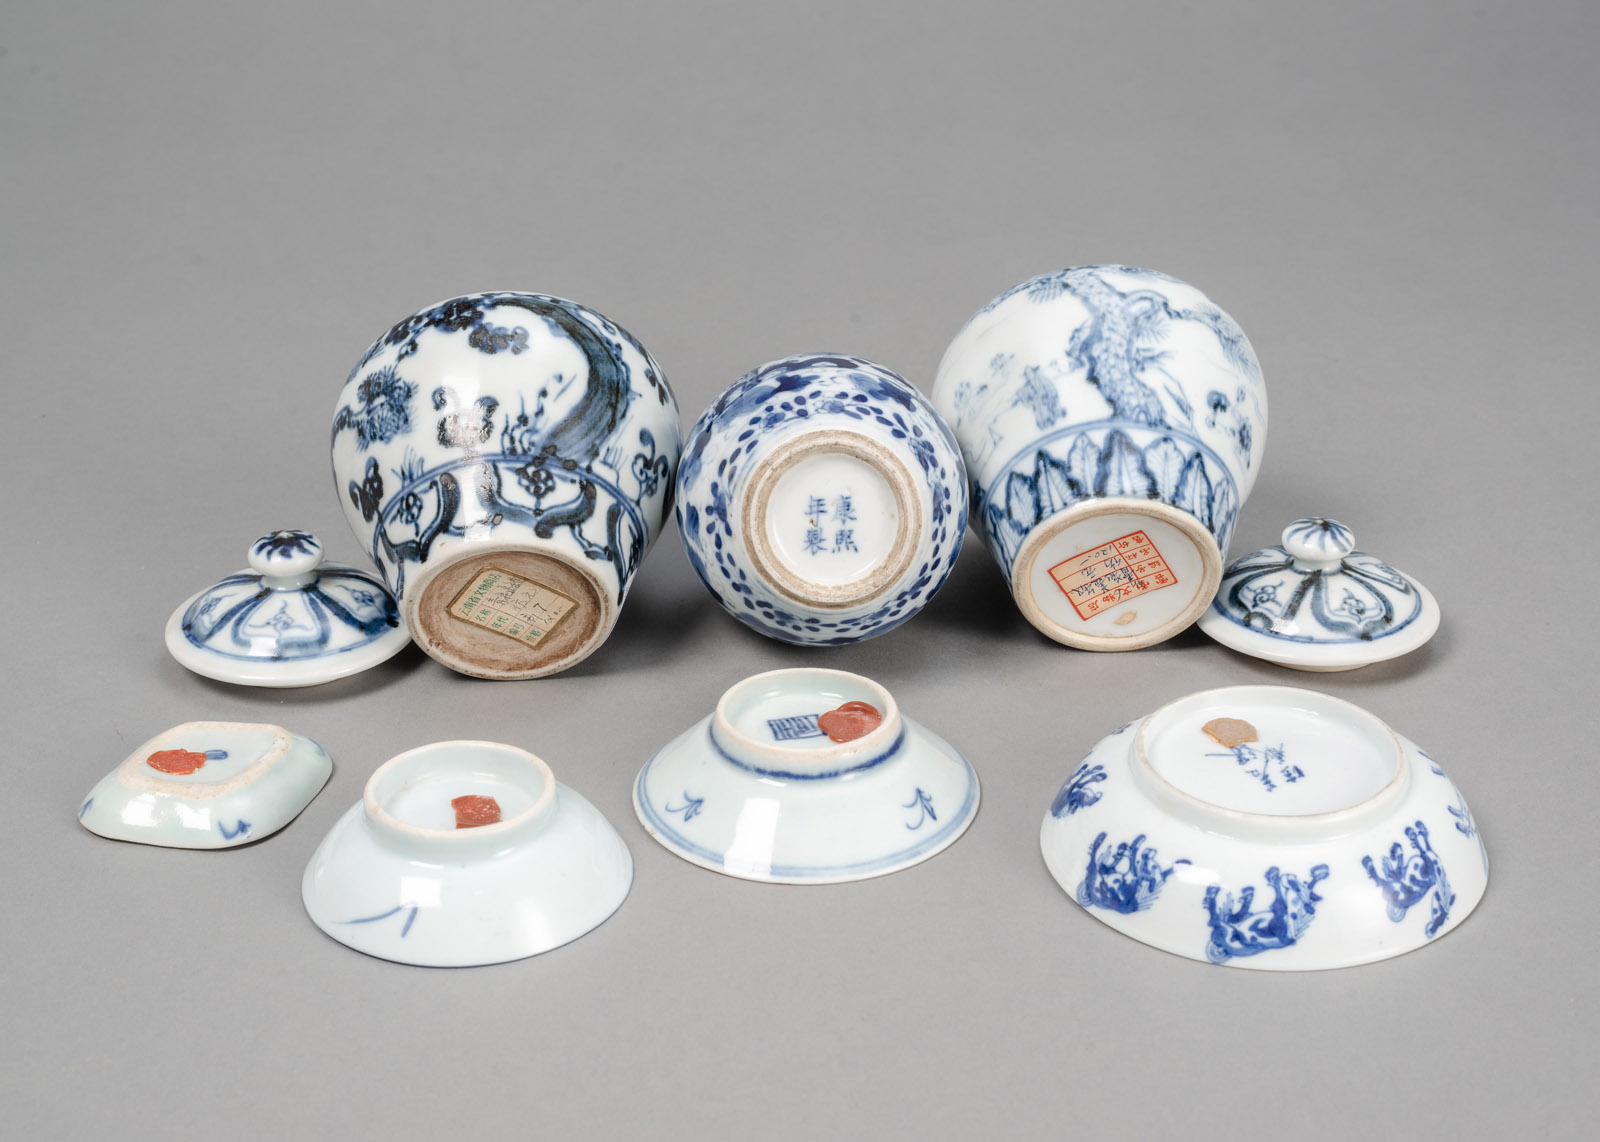 A GROUP OF BLUE AND WHITE PORCELAIN PIECES, E.G. TWO LIDDED VASES, ONE 'HULUPING', A HORSES DISH - Image 3 of 3